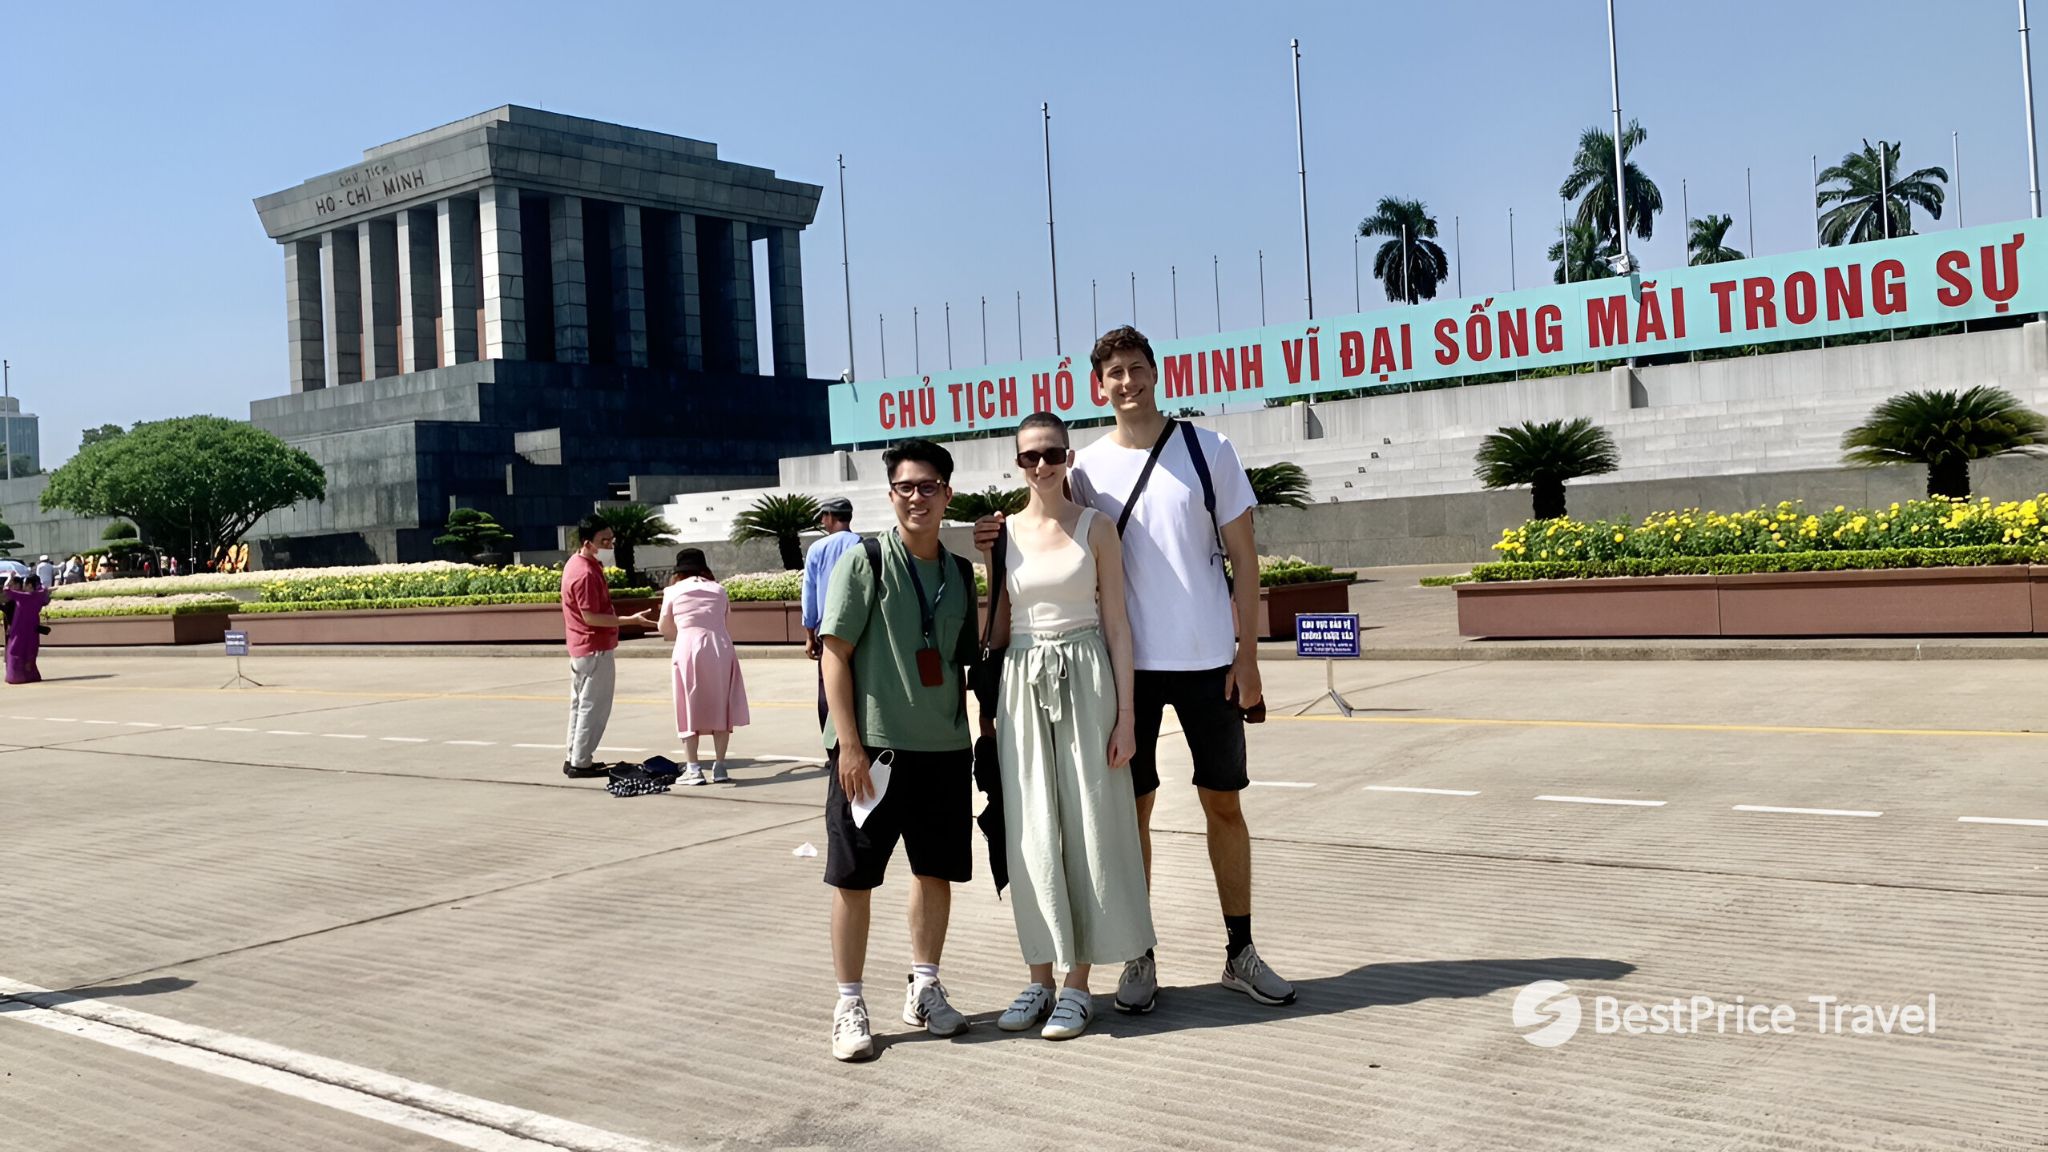 Day 2 Ho Chi Minh Mausoleum Holds Significant Historical And Cultural Importance